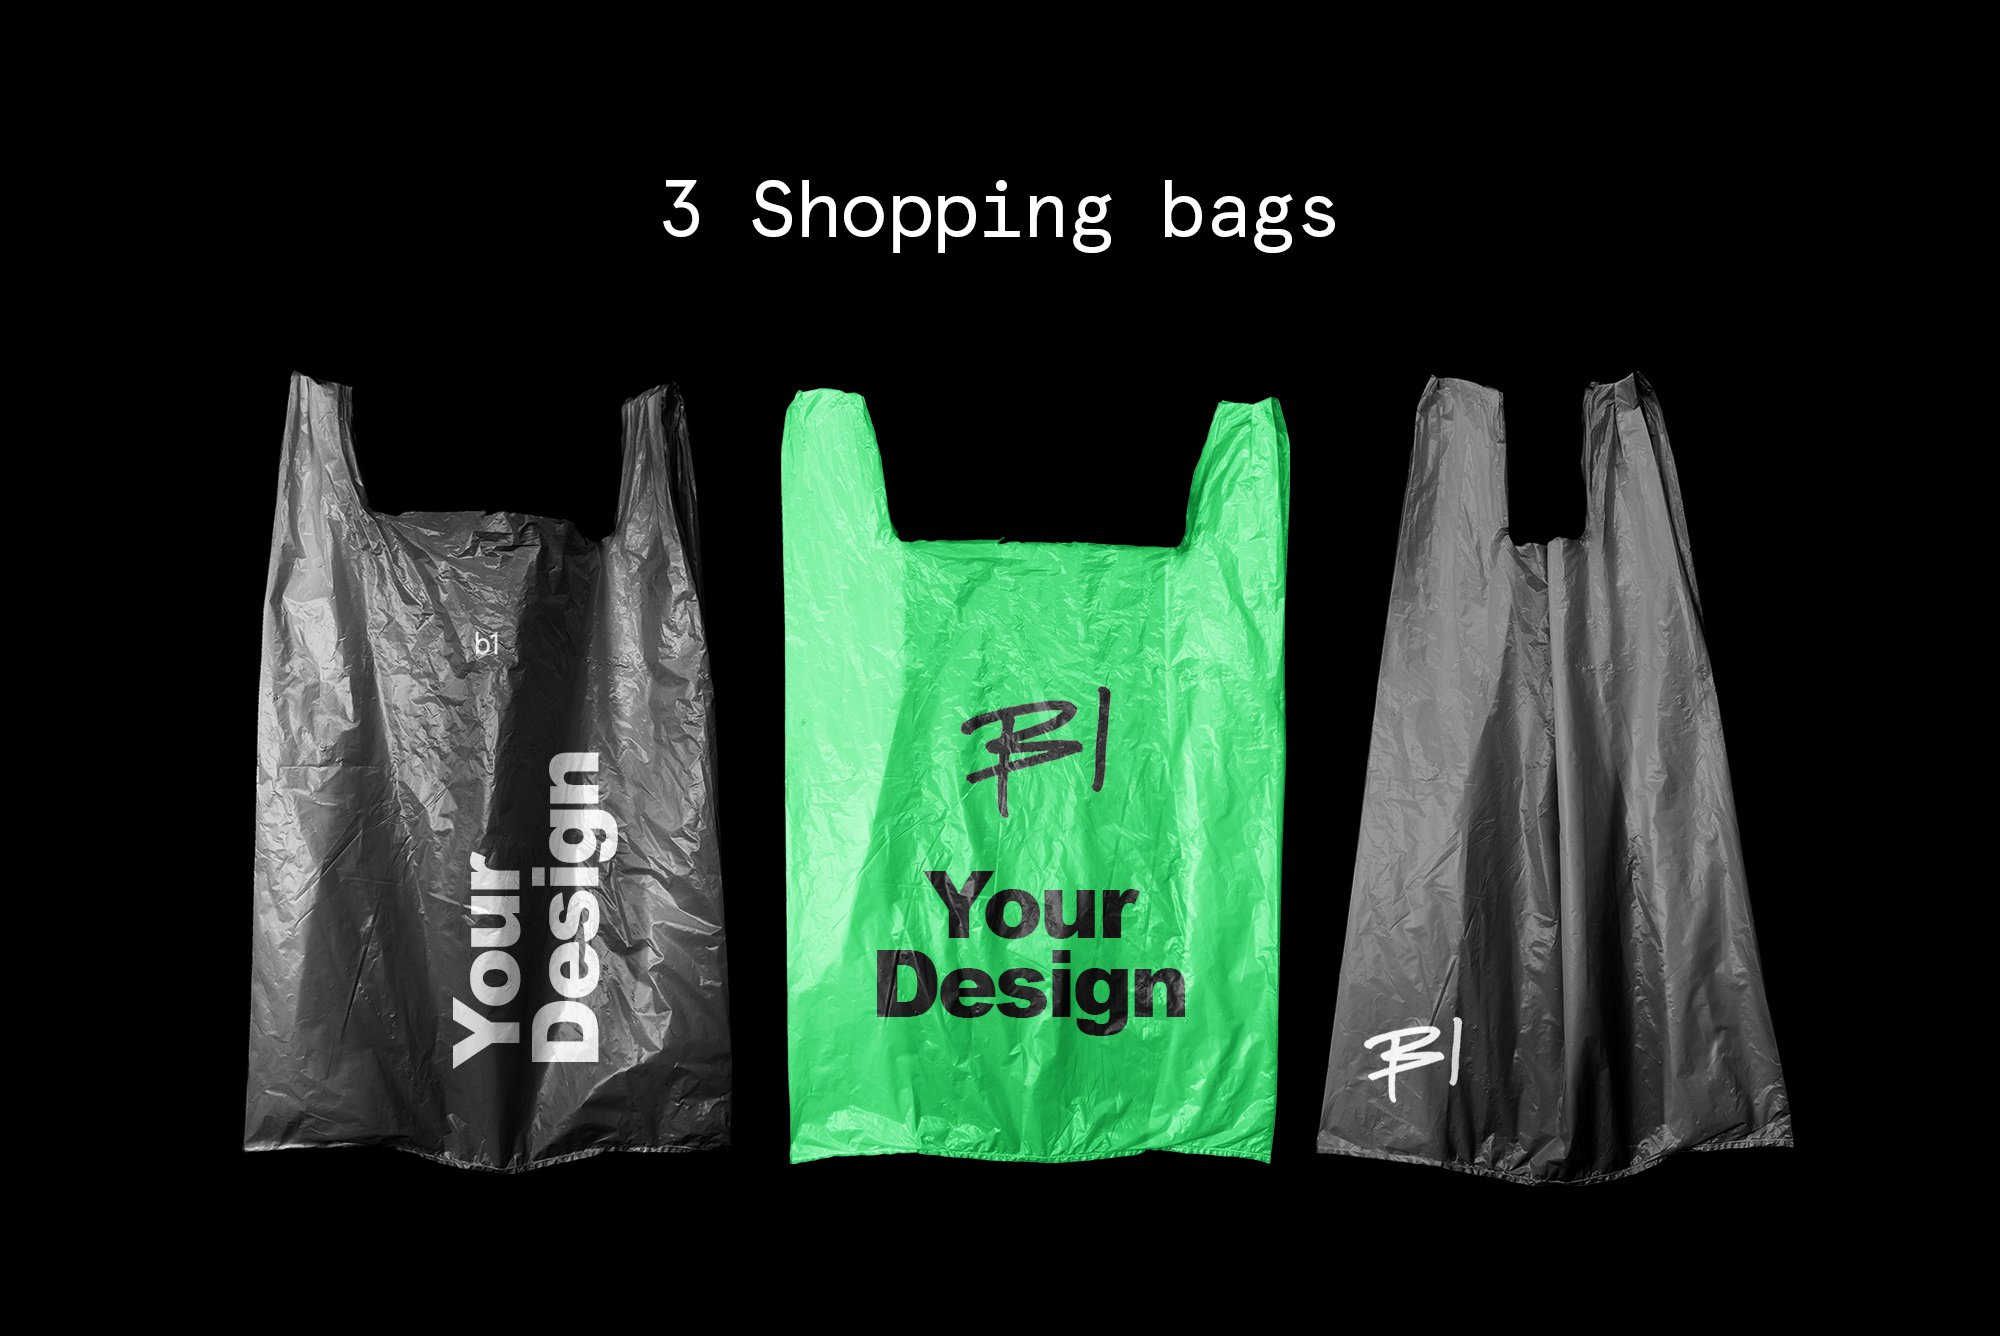 How many times must a bag be reused for it to be more environmentally  friendly than